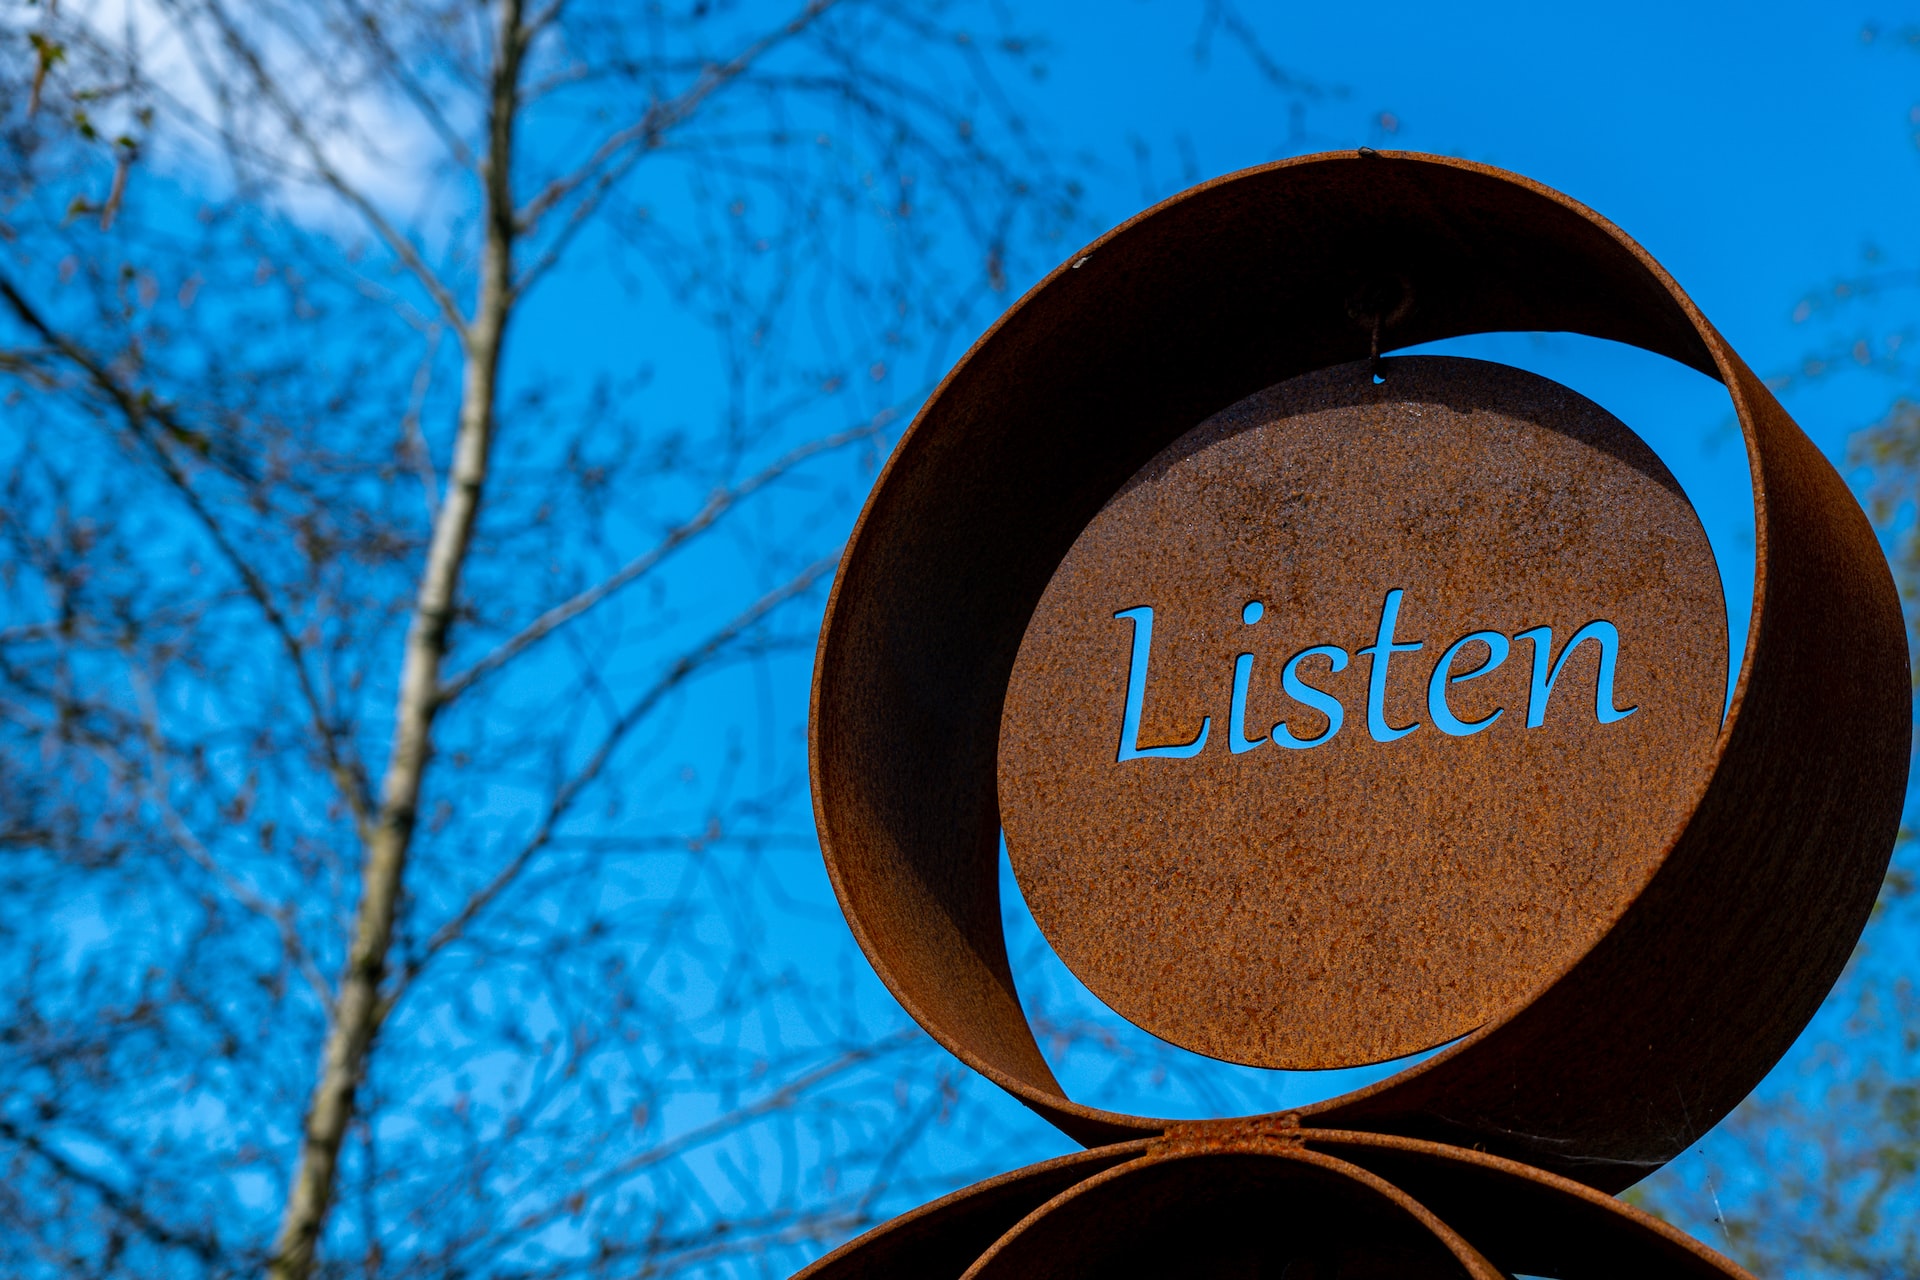 A sculpture with the word 'listen' carved into it